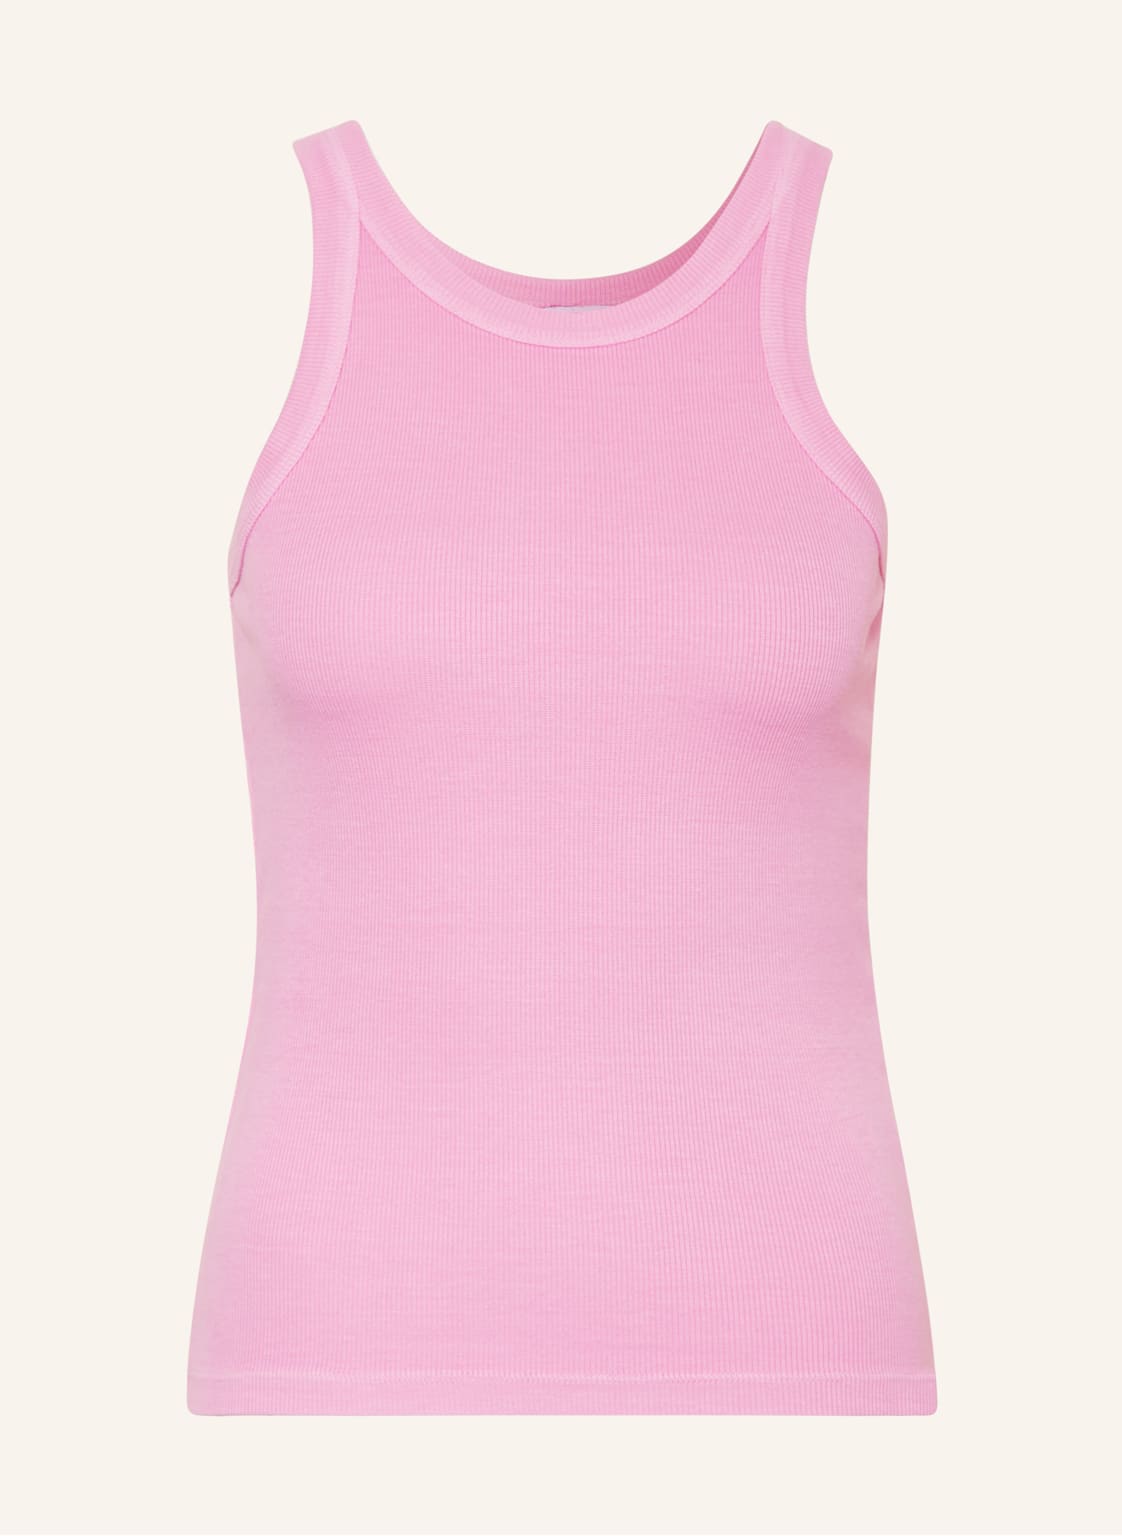 Ag Jeans Top pink von ag jeans